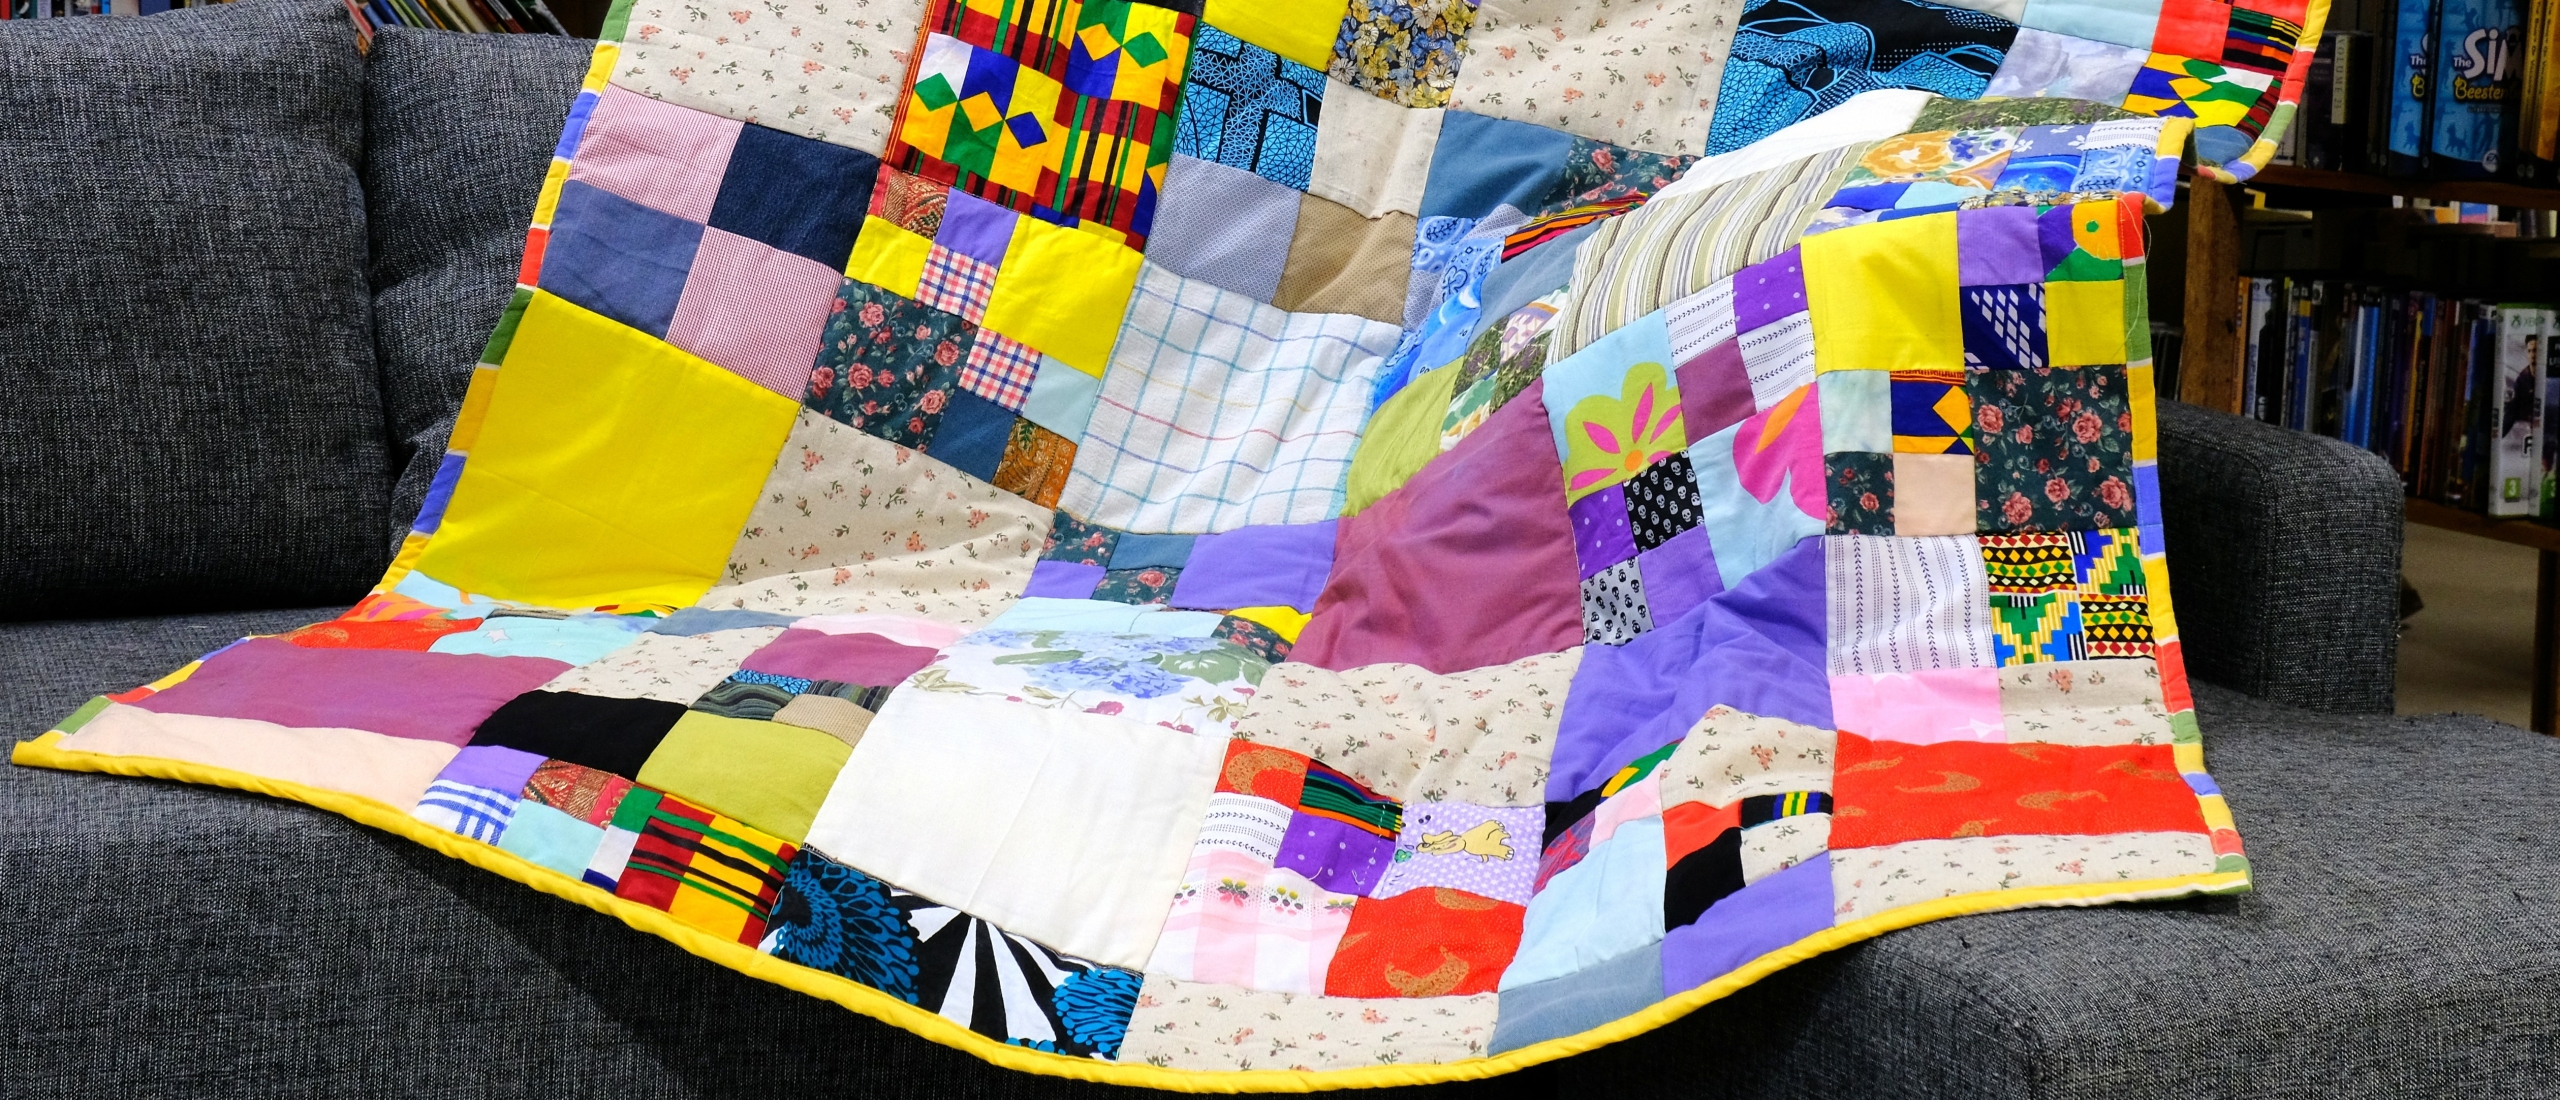 Donation Quilt for courage and comfort for disenfranchised youth